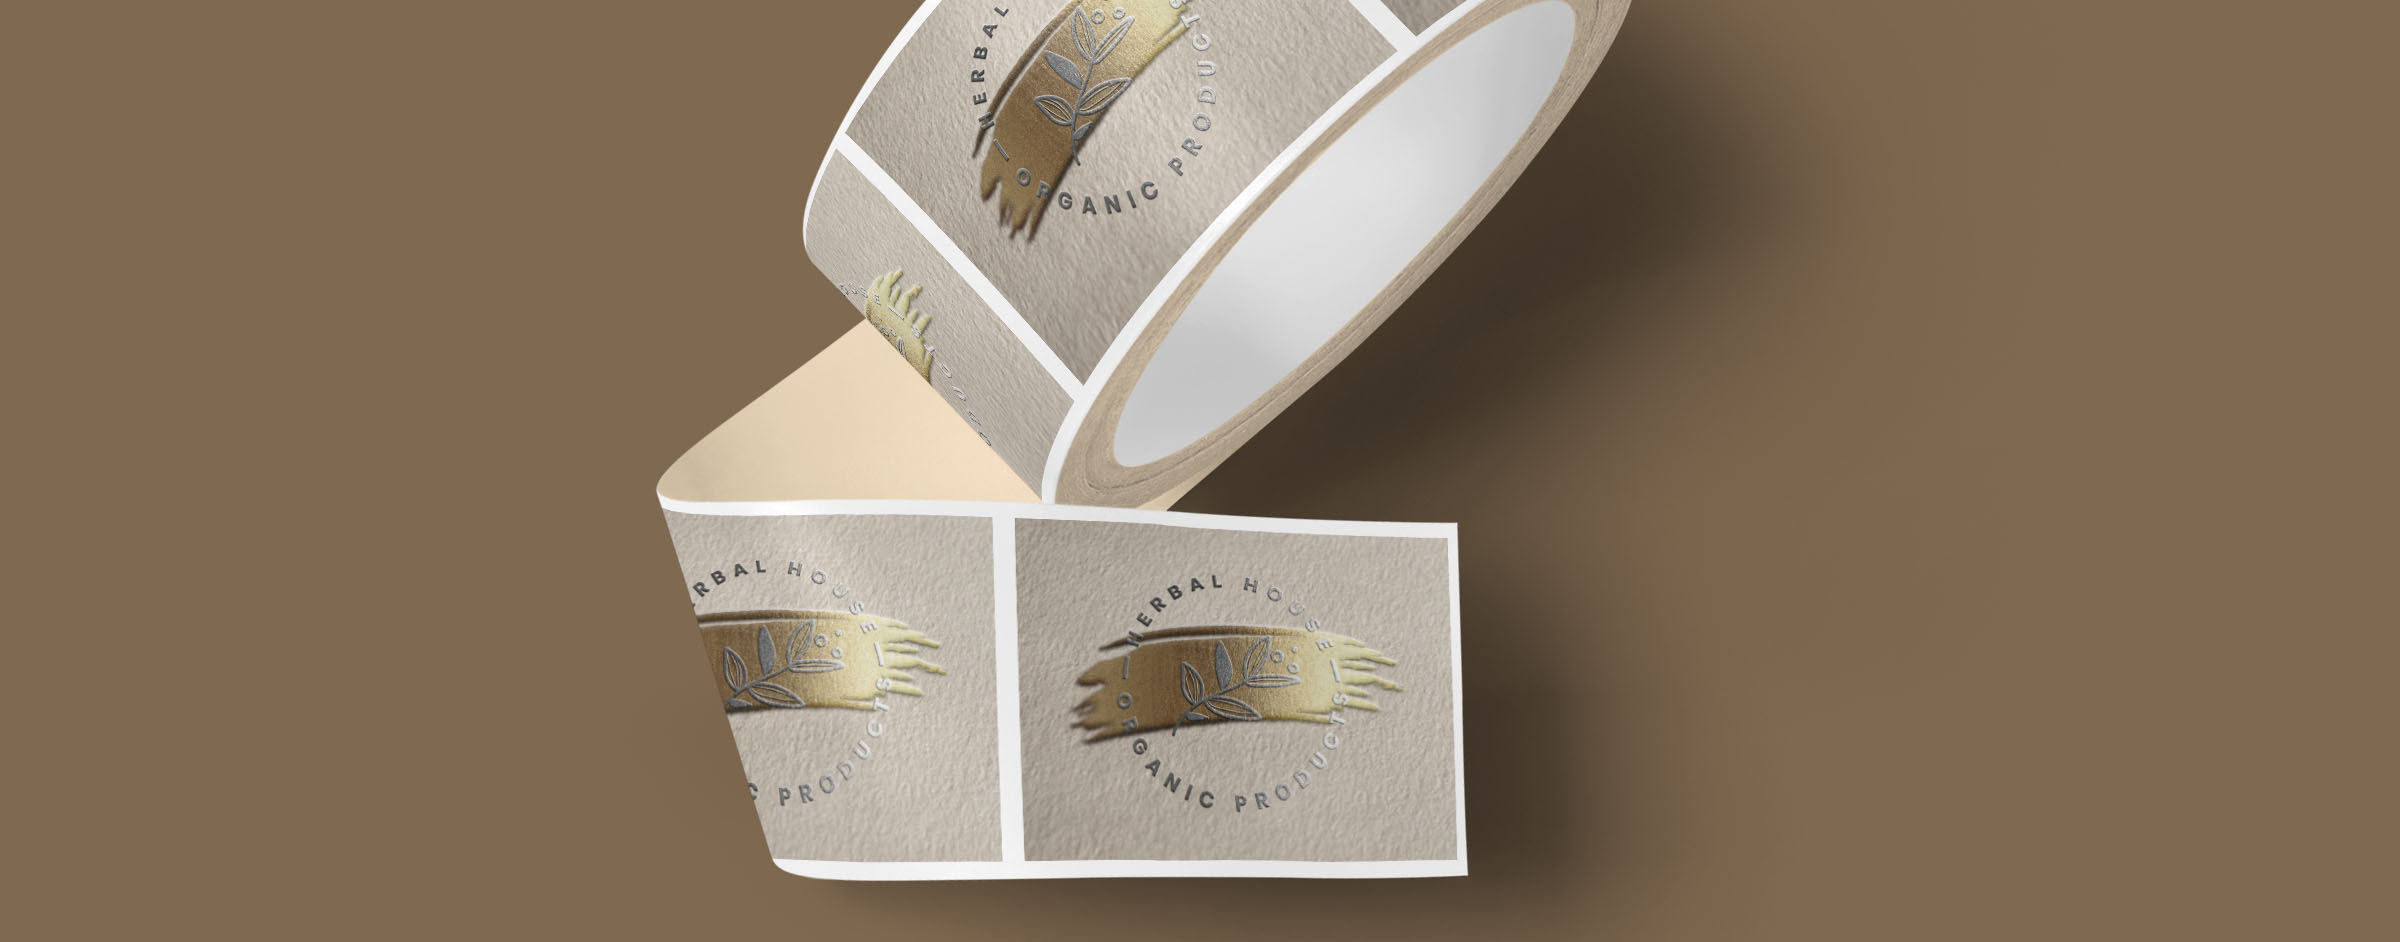 Embellishment stickers & foil stickers to make a great impression.